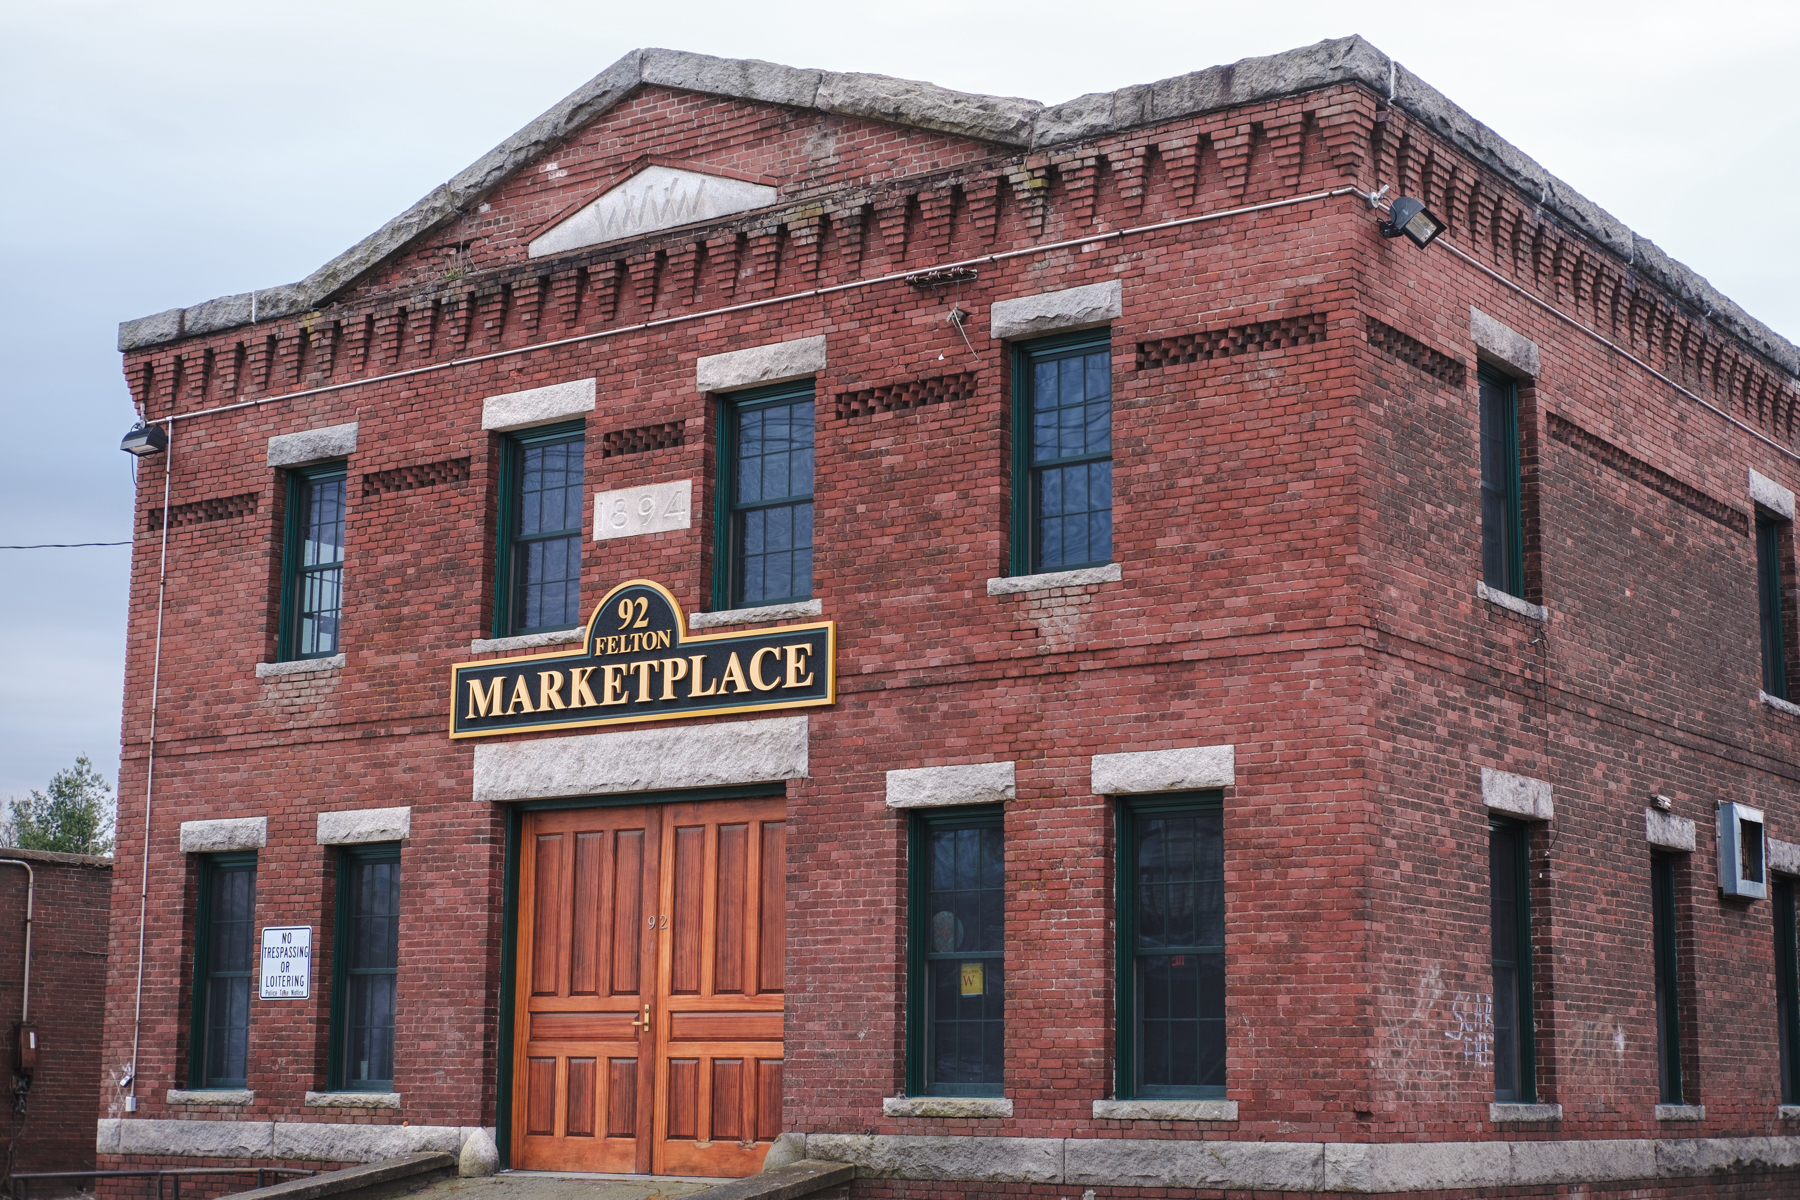 A two-story red brick building with the signage “92 FELTON MARKETPLACE” and the year “1894” displayed near the roof. The building features large wooden double doors, rectangular windows, and decorative brickwork along the edges. 